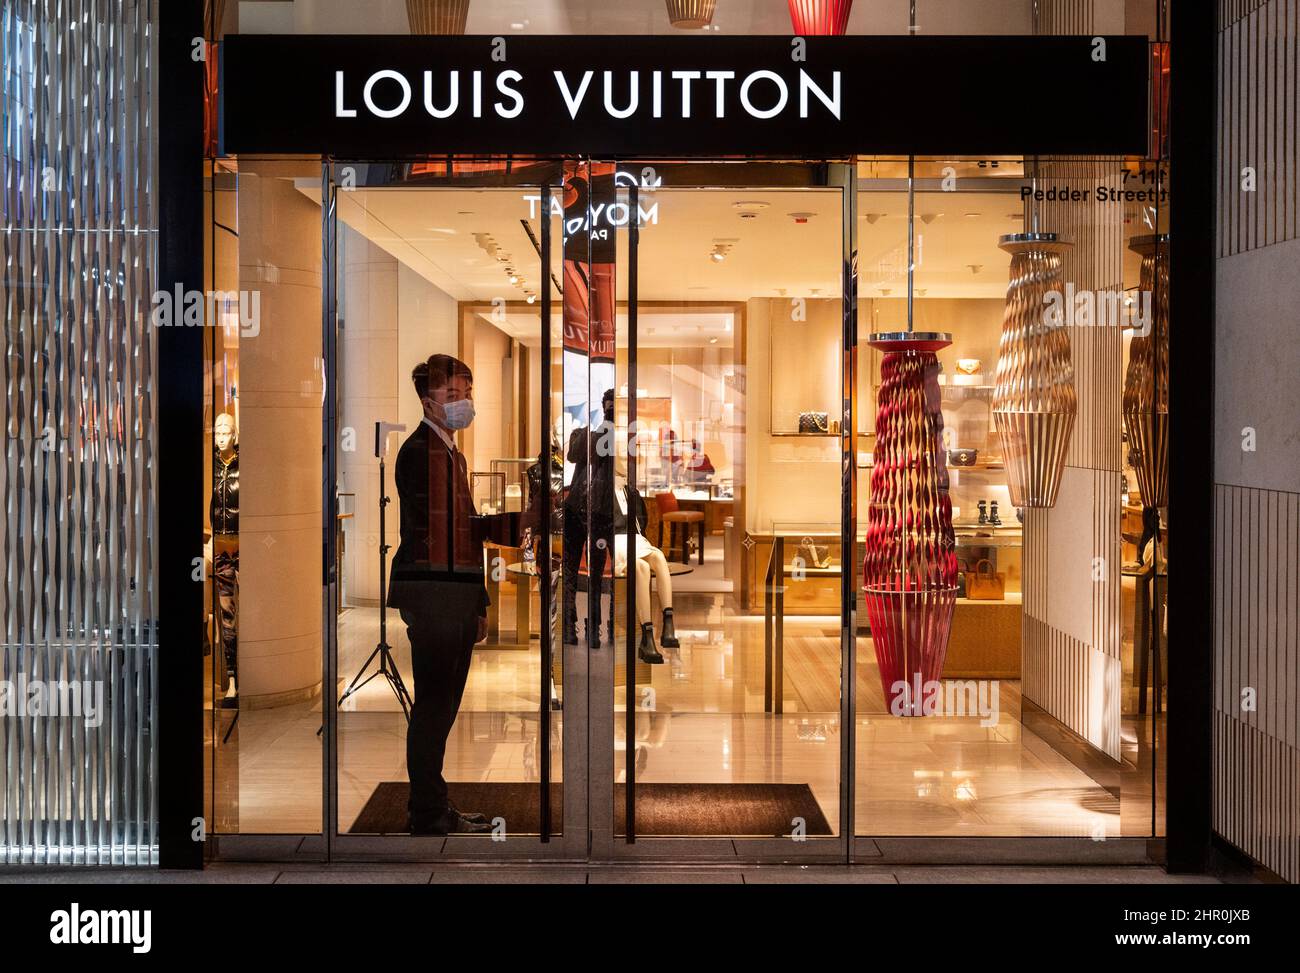 Louis Vuitton The Rainbow Project Window Display US Debut